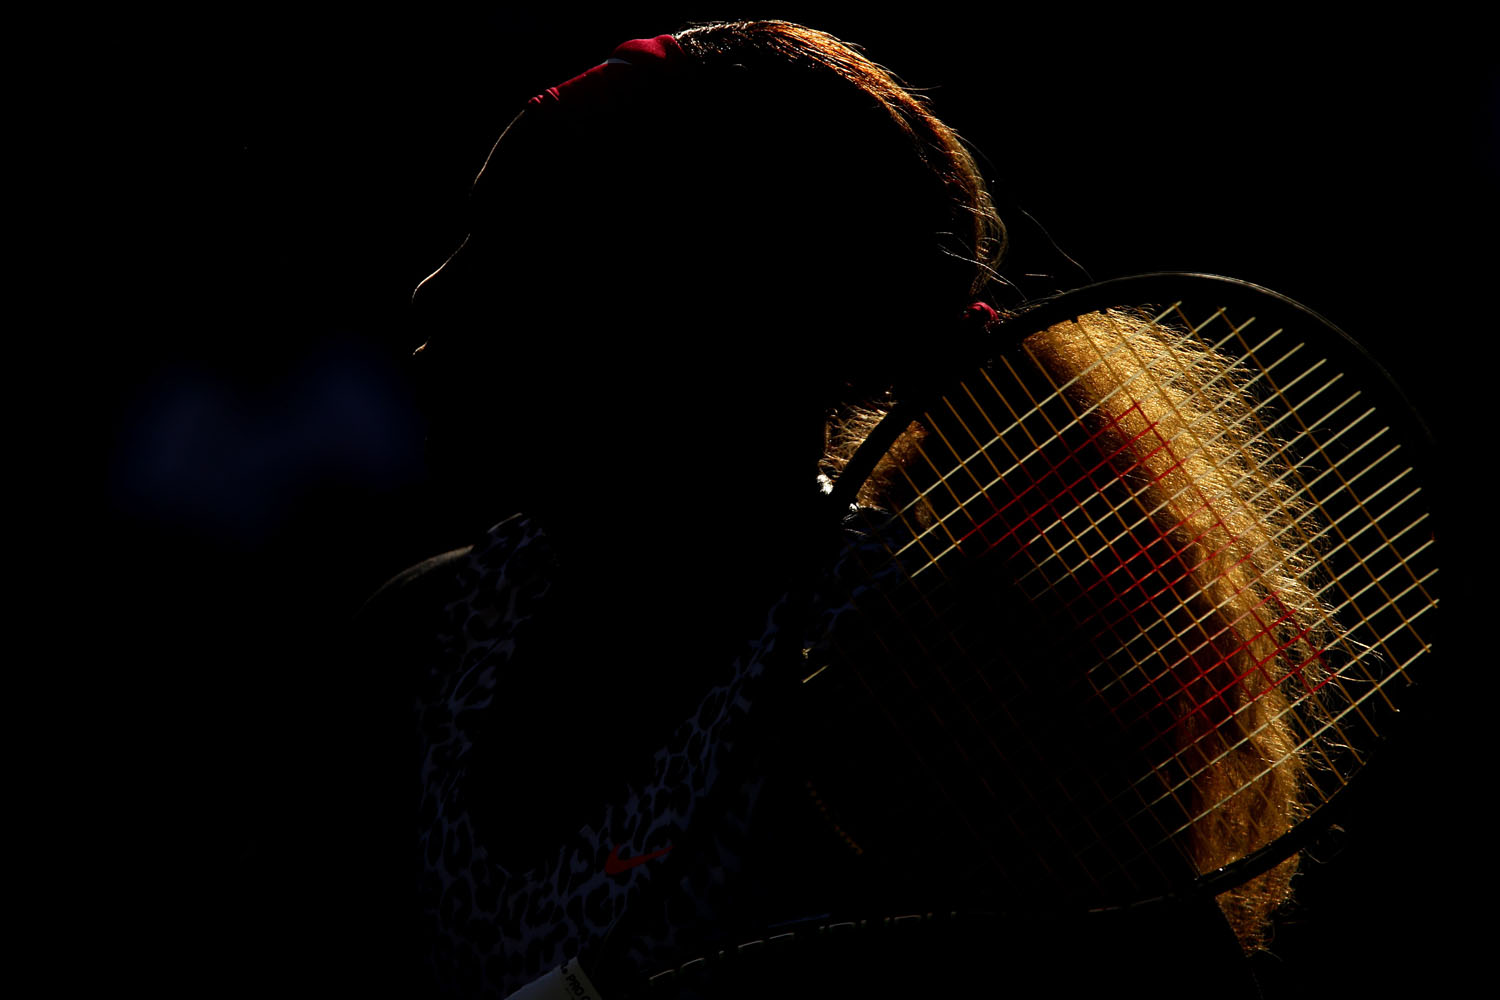 Sept. 7, 2014. Serena Williams of USA in action during the Ladies Final at the US Open, 2014.